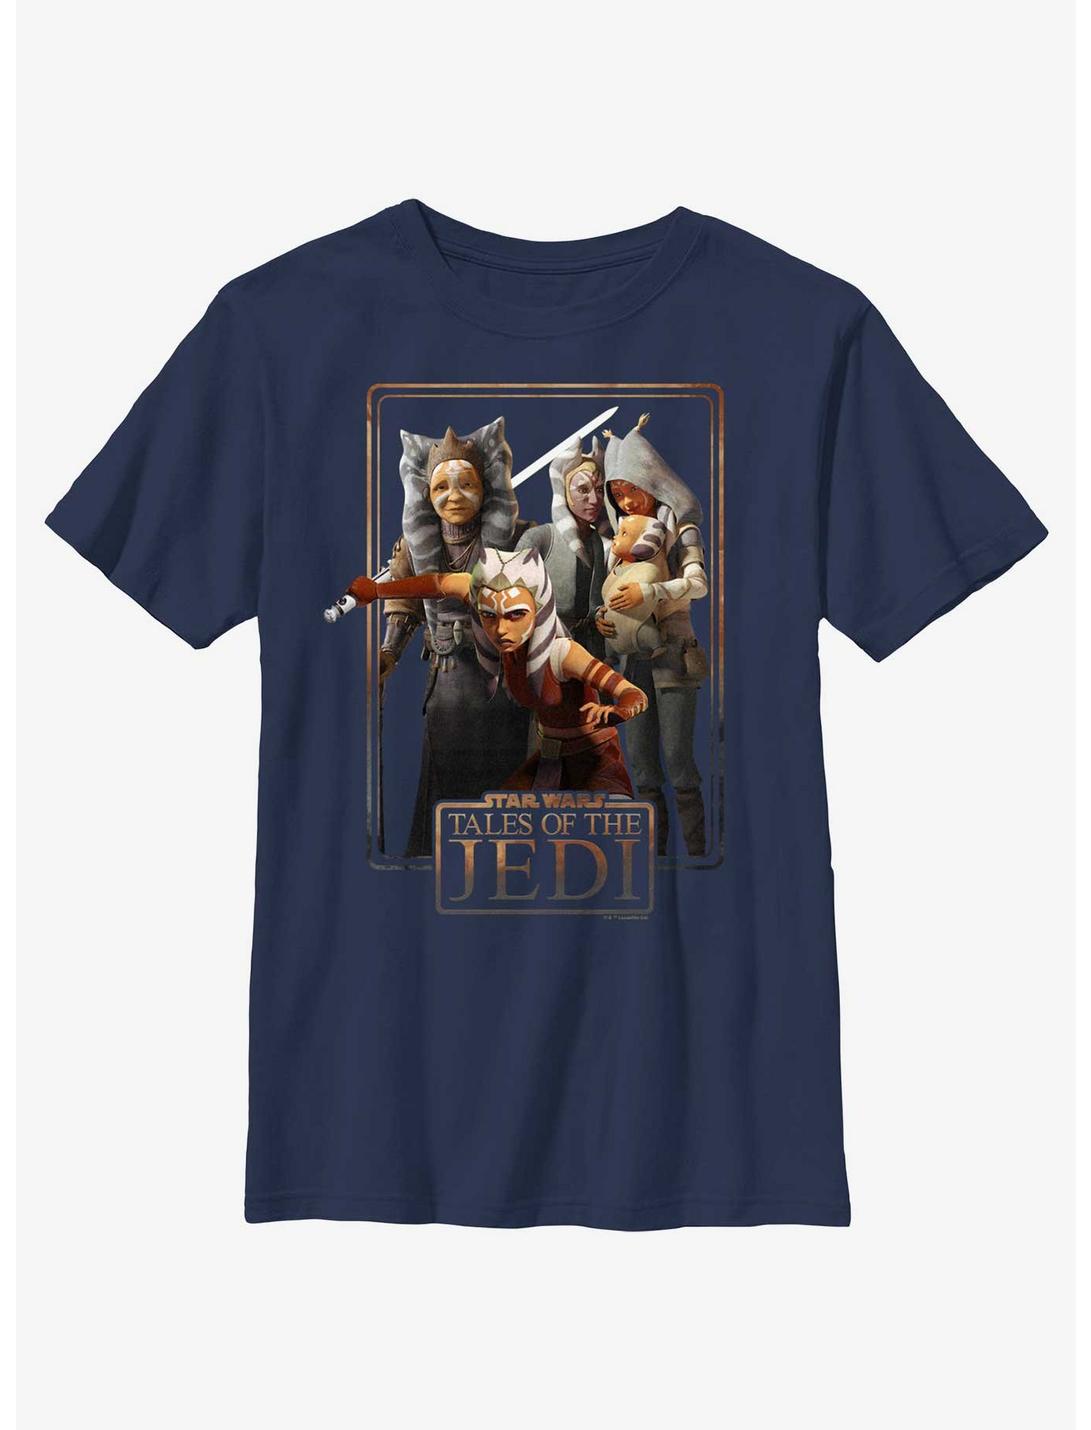 Star Wars: Tales of the Jedi Togruta Family Poster Youth T-Shirt, NAVY, hi-res